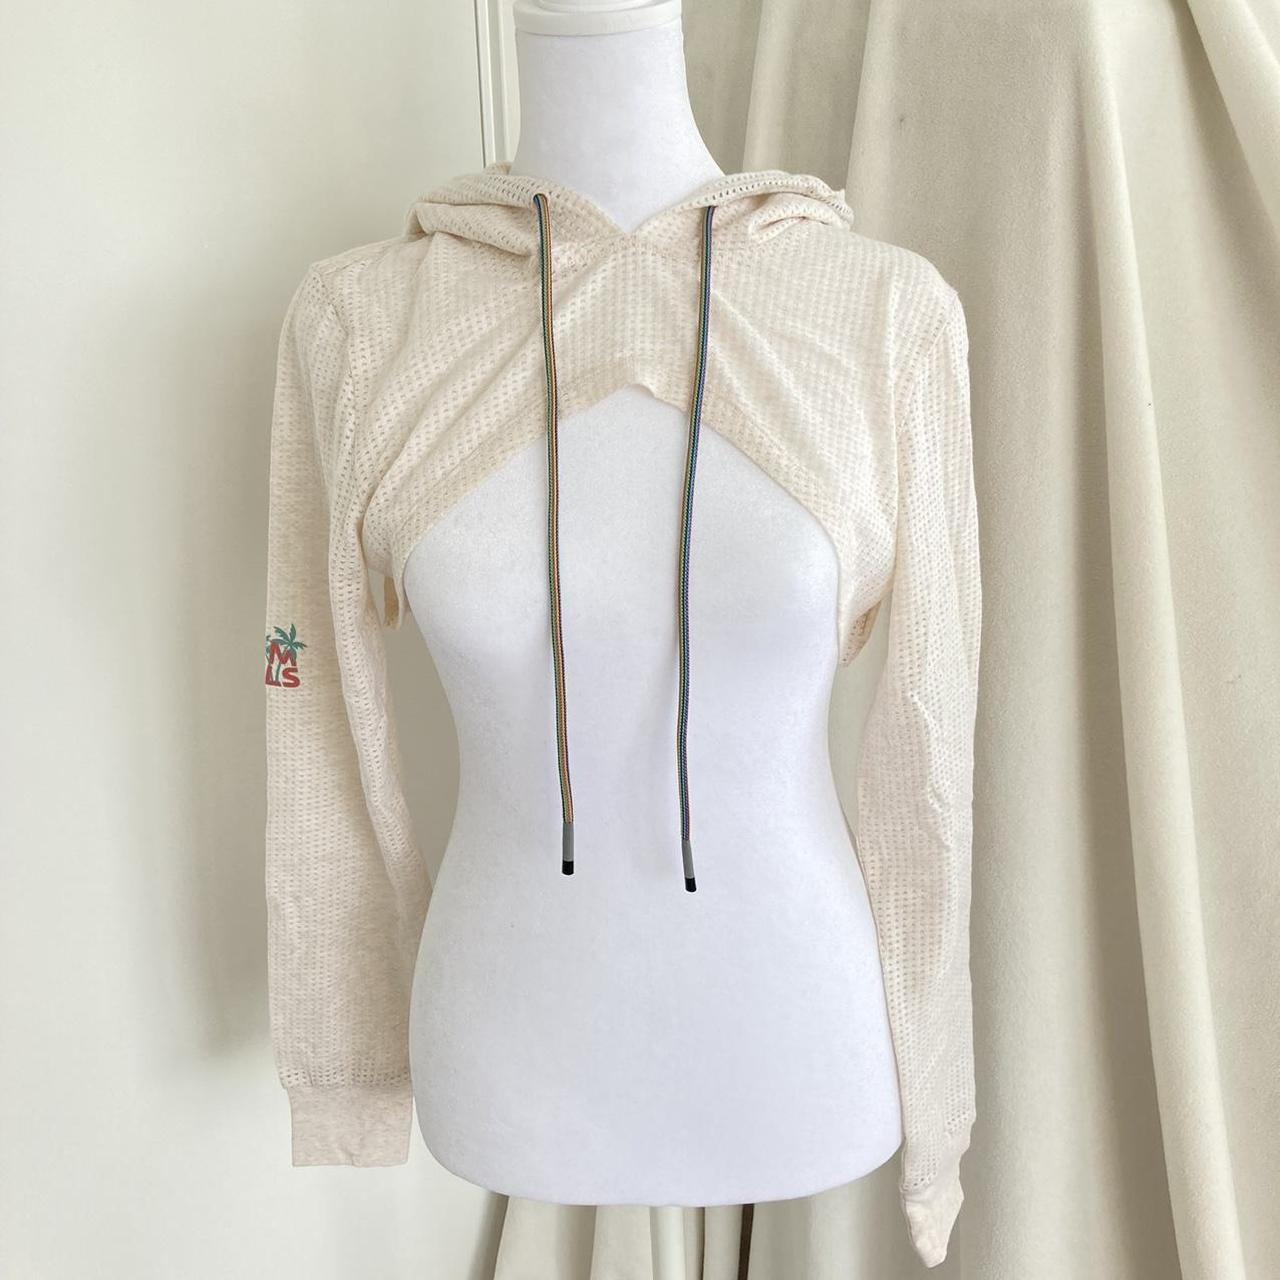 NEW WITH TAG Magnlens White/Beige Cropped... - Depop